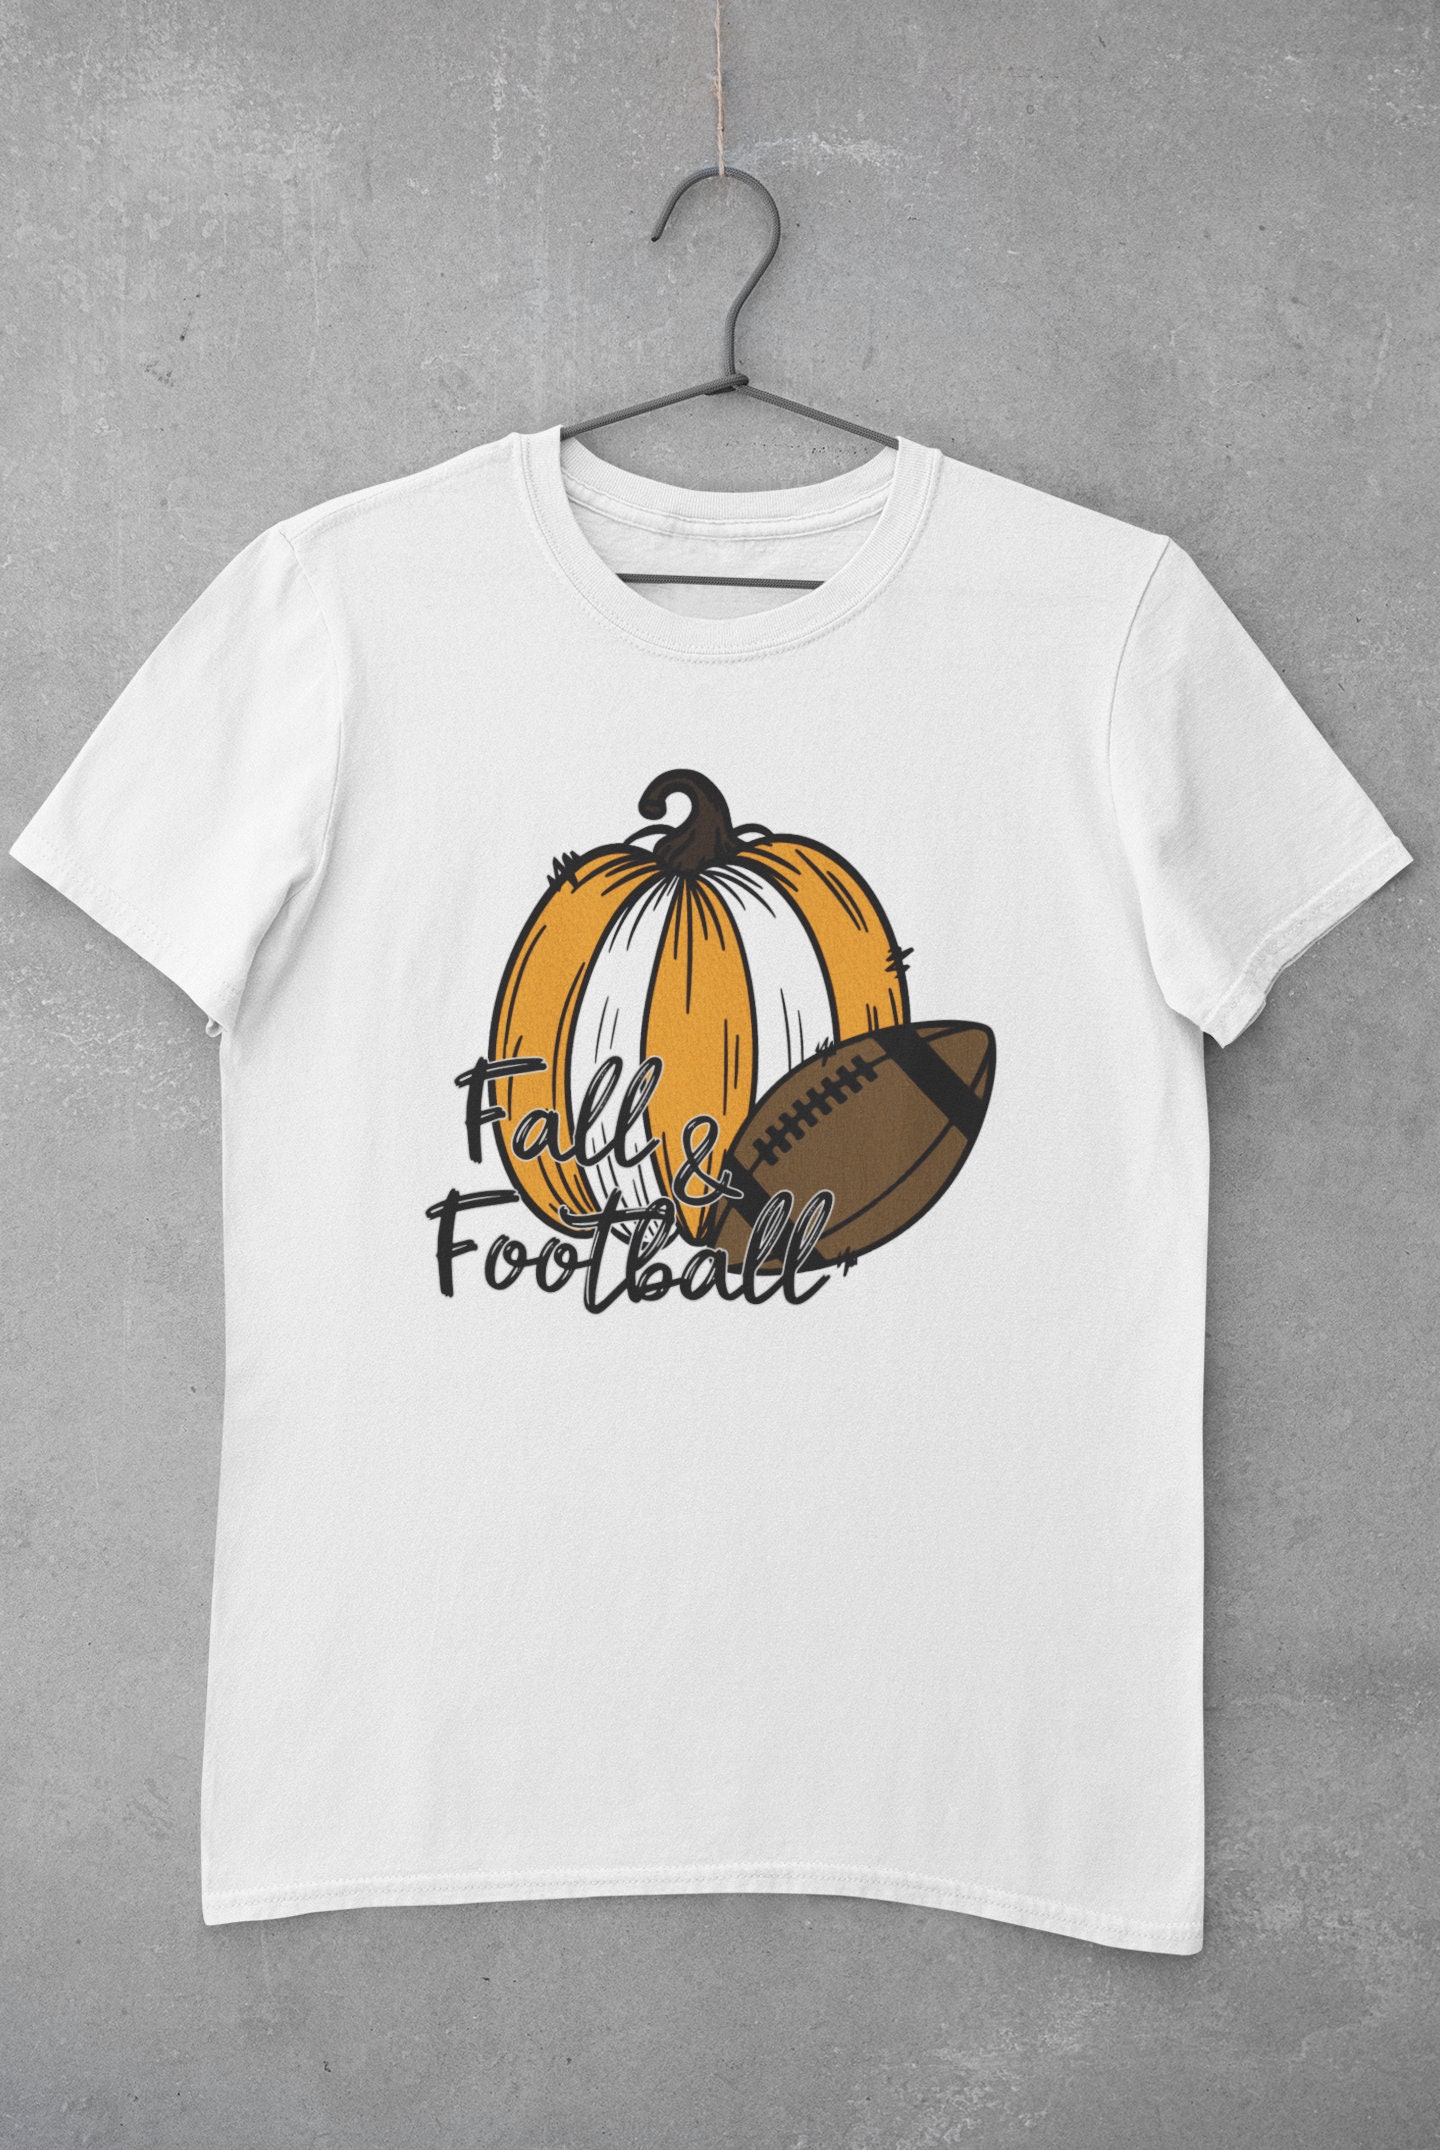 Fall Means Pumpkins and Football! Canvas Paint Kit – Sips n Strokes